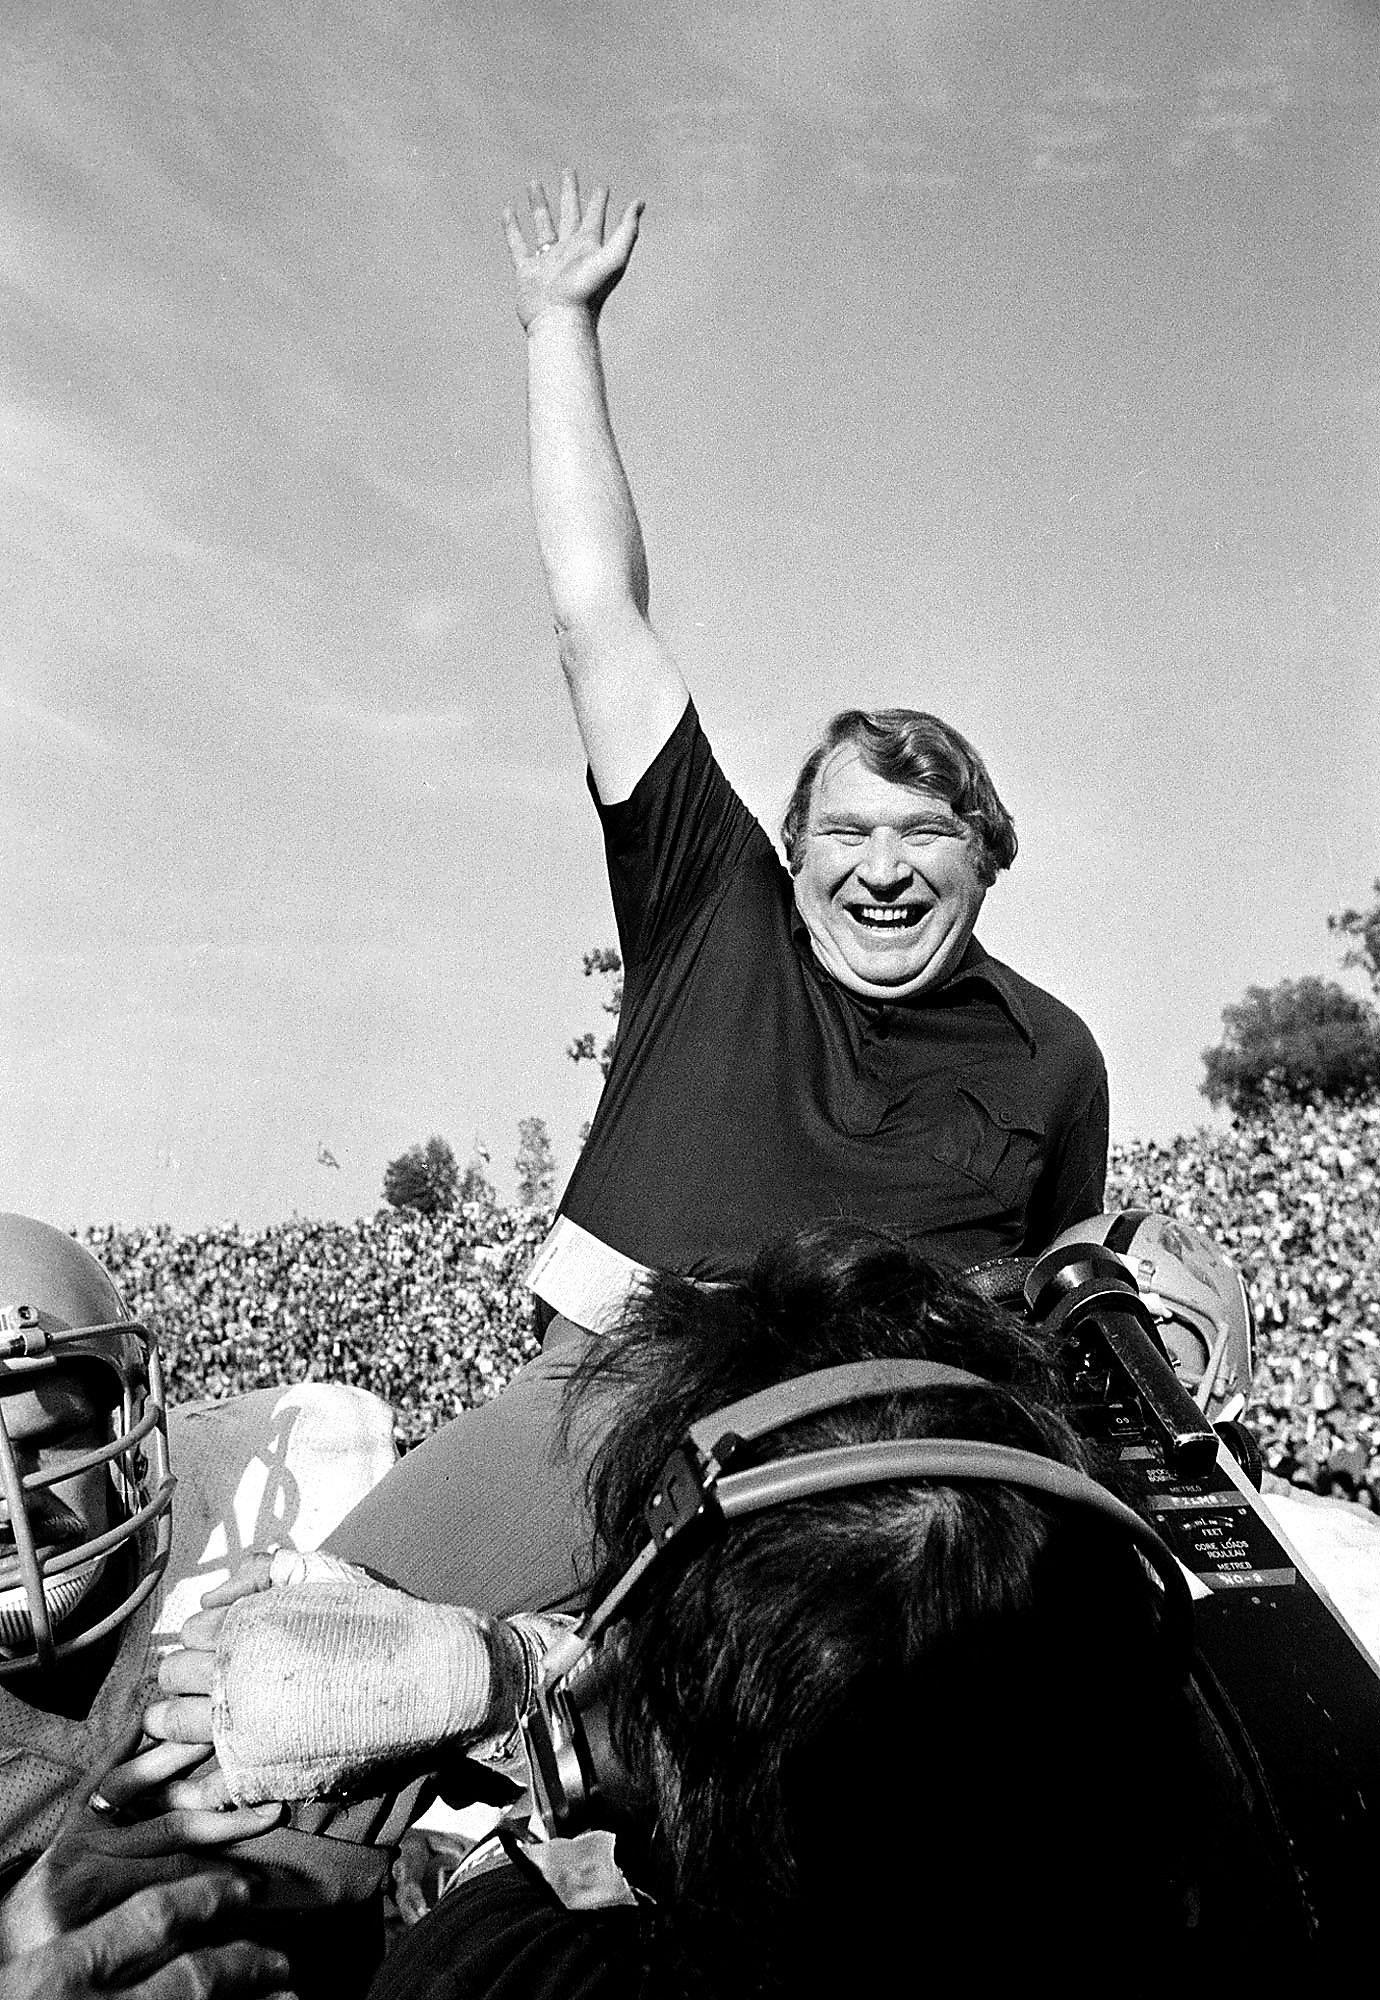 It was about time: Raiders dusted Minnesota in Super Bowl XI